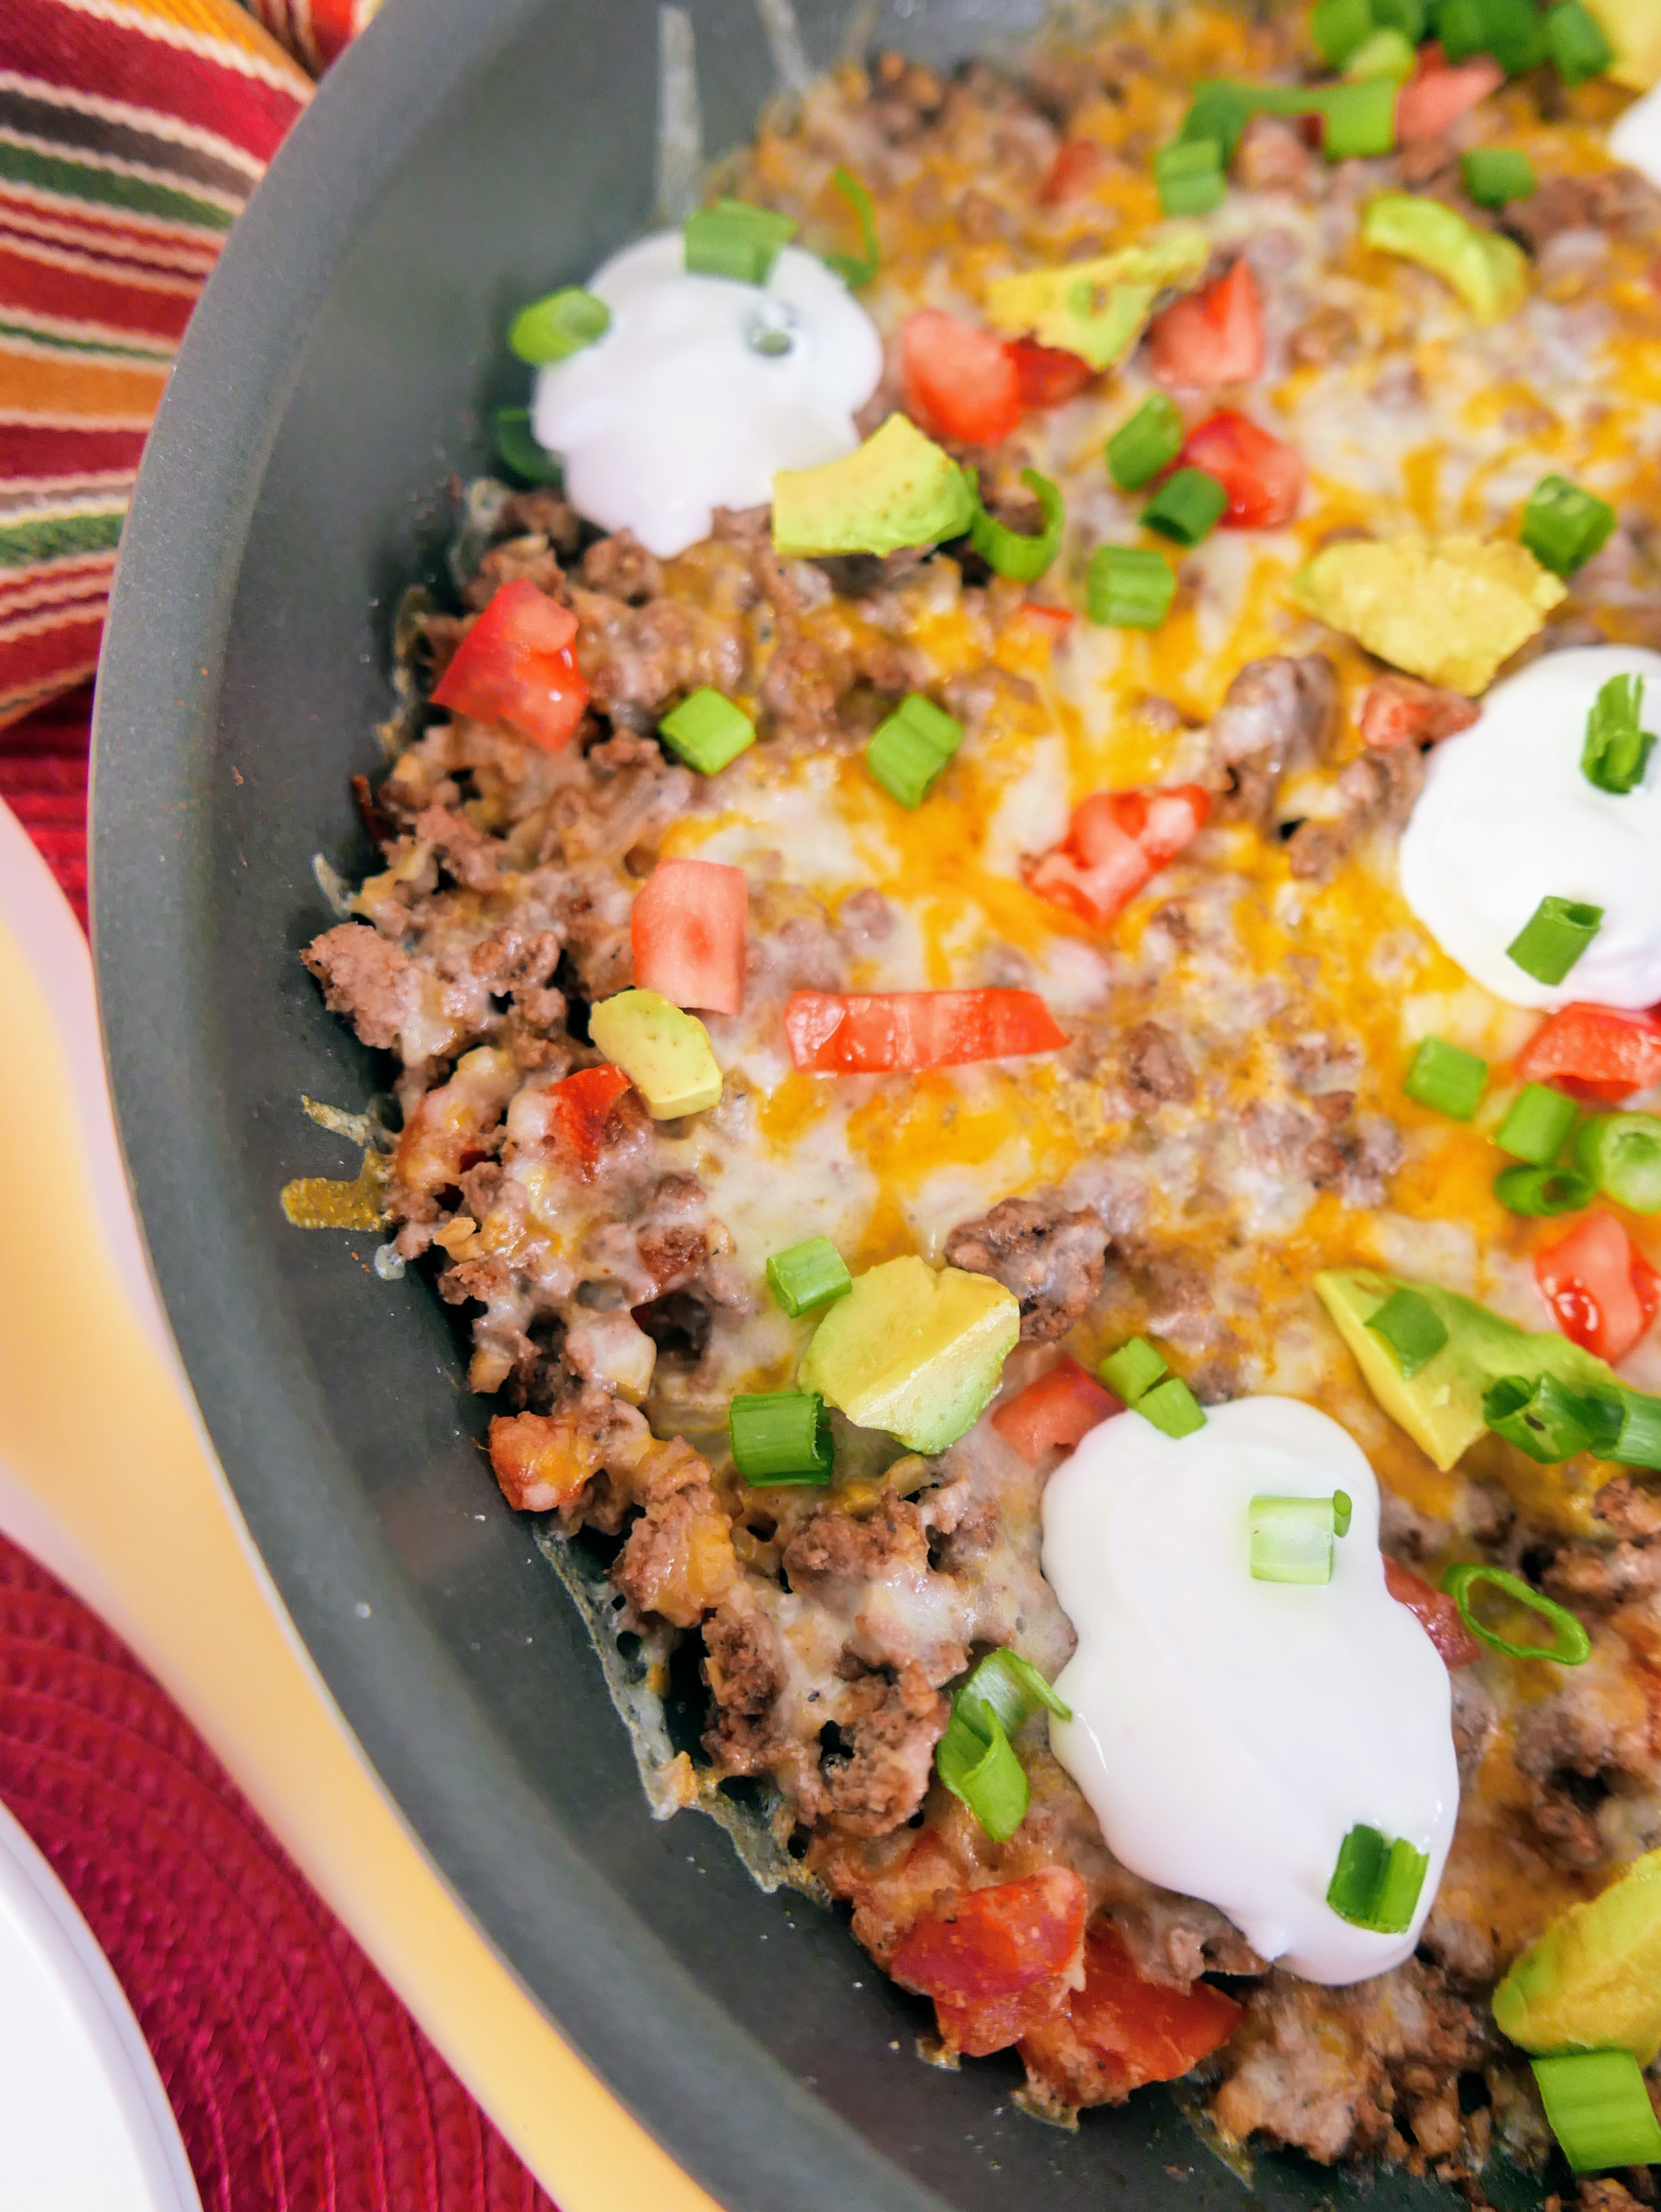 Easy Low-Carb Mexican Skillet